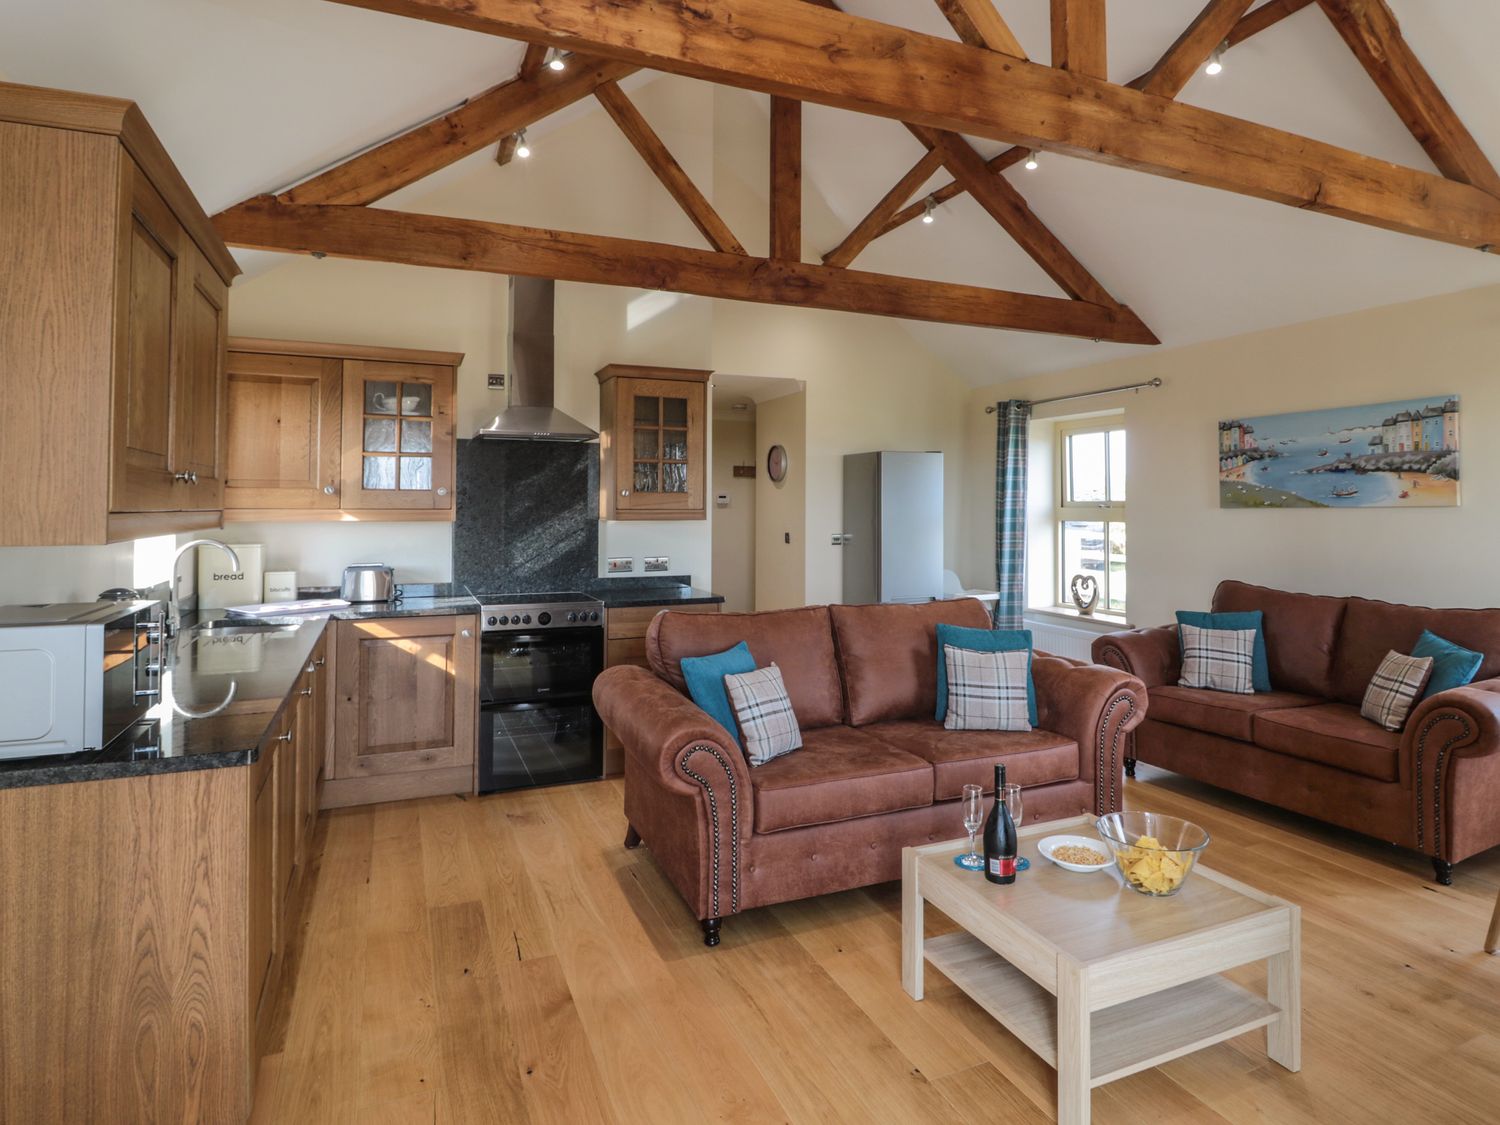 Smithy Cottage, Embleton, Northumberland. Single-storey cottage with an open-plan living space. WiFi